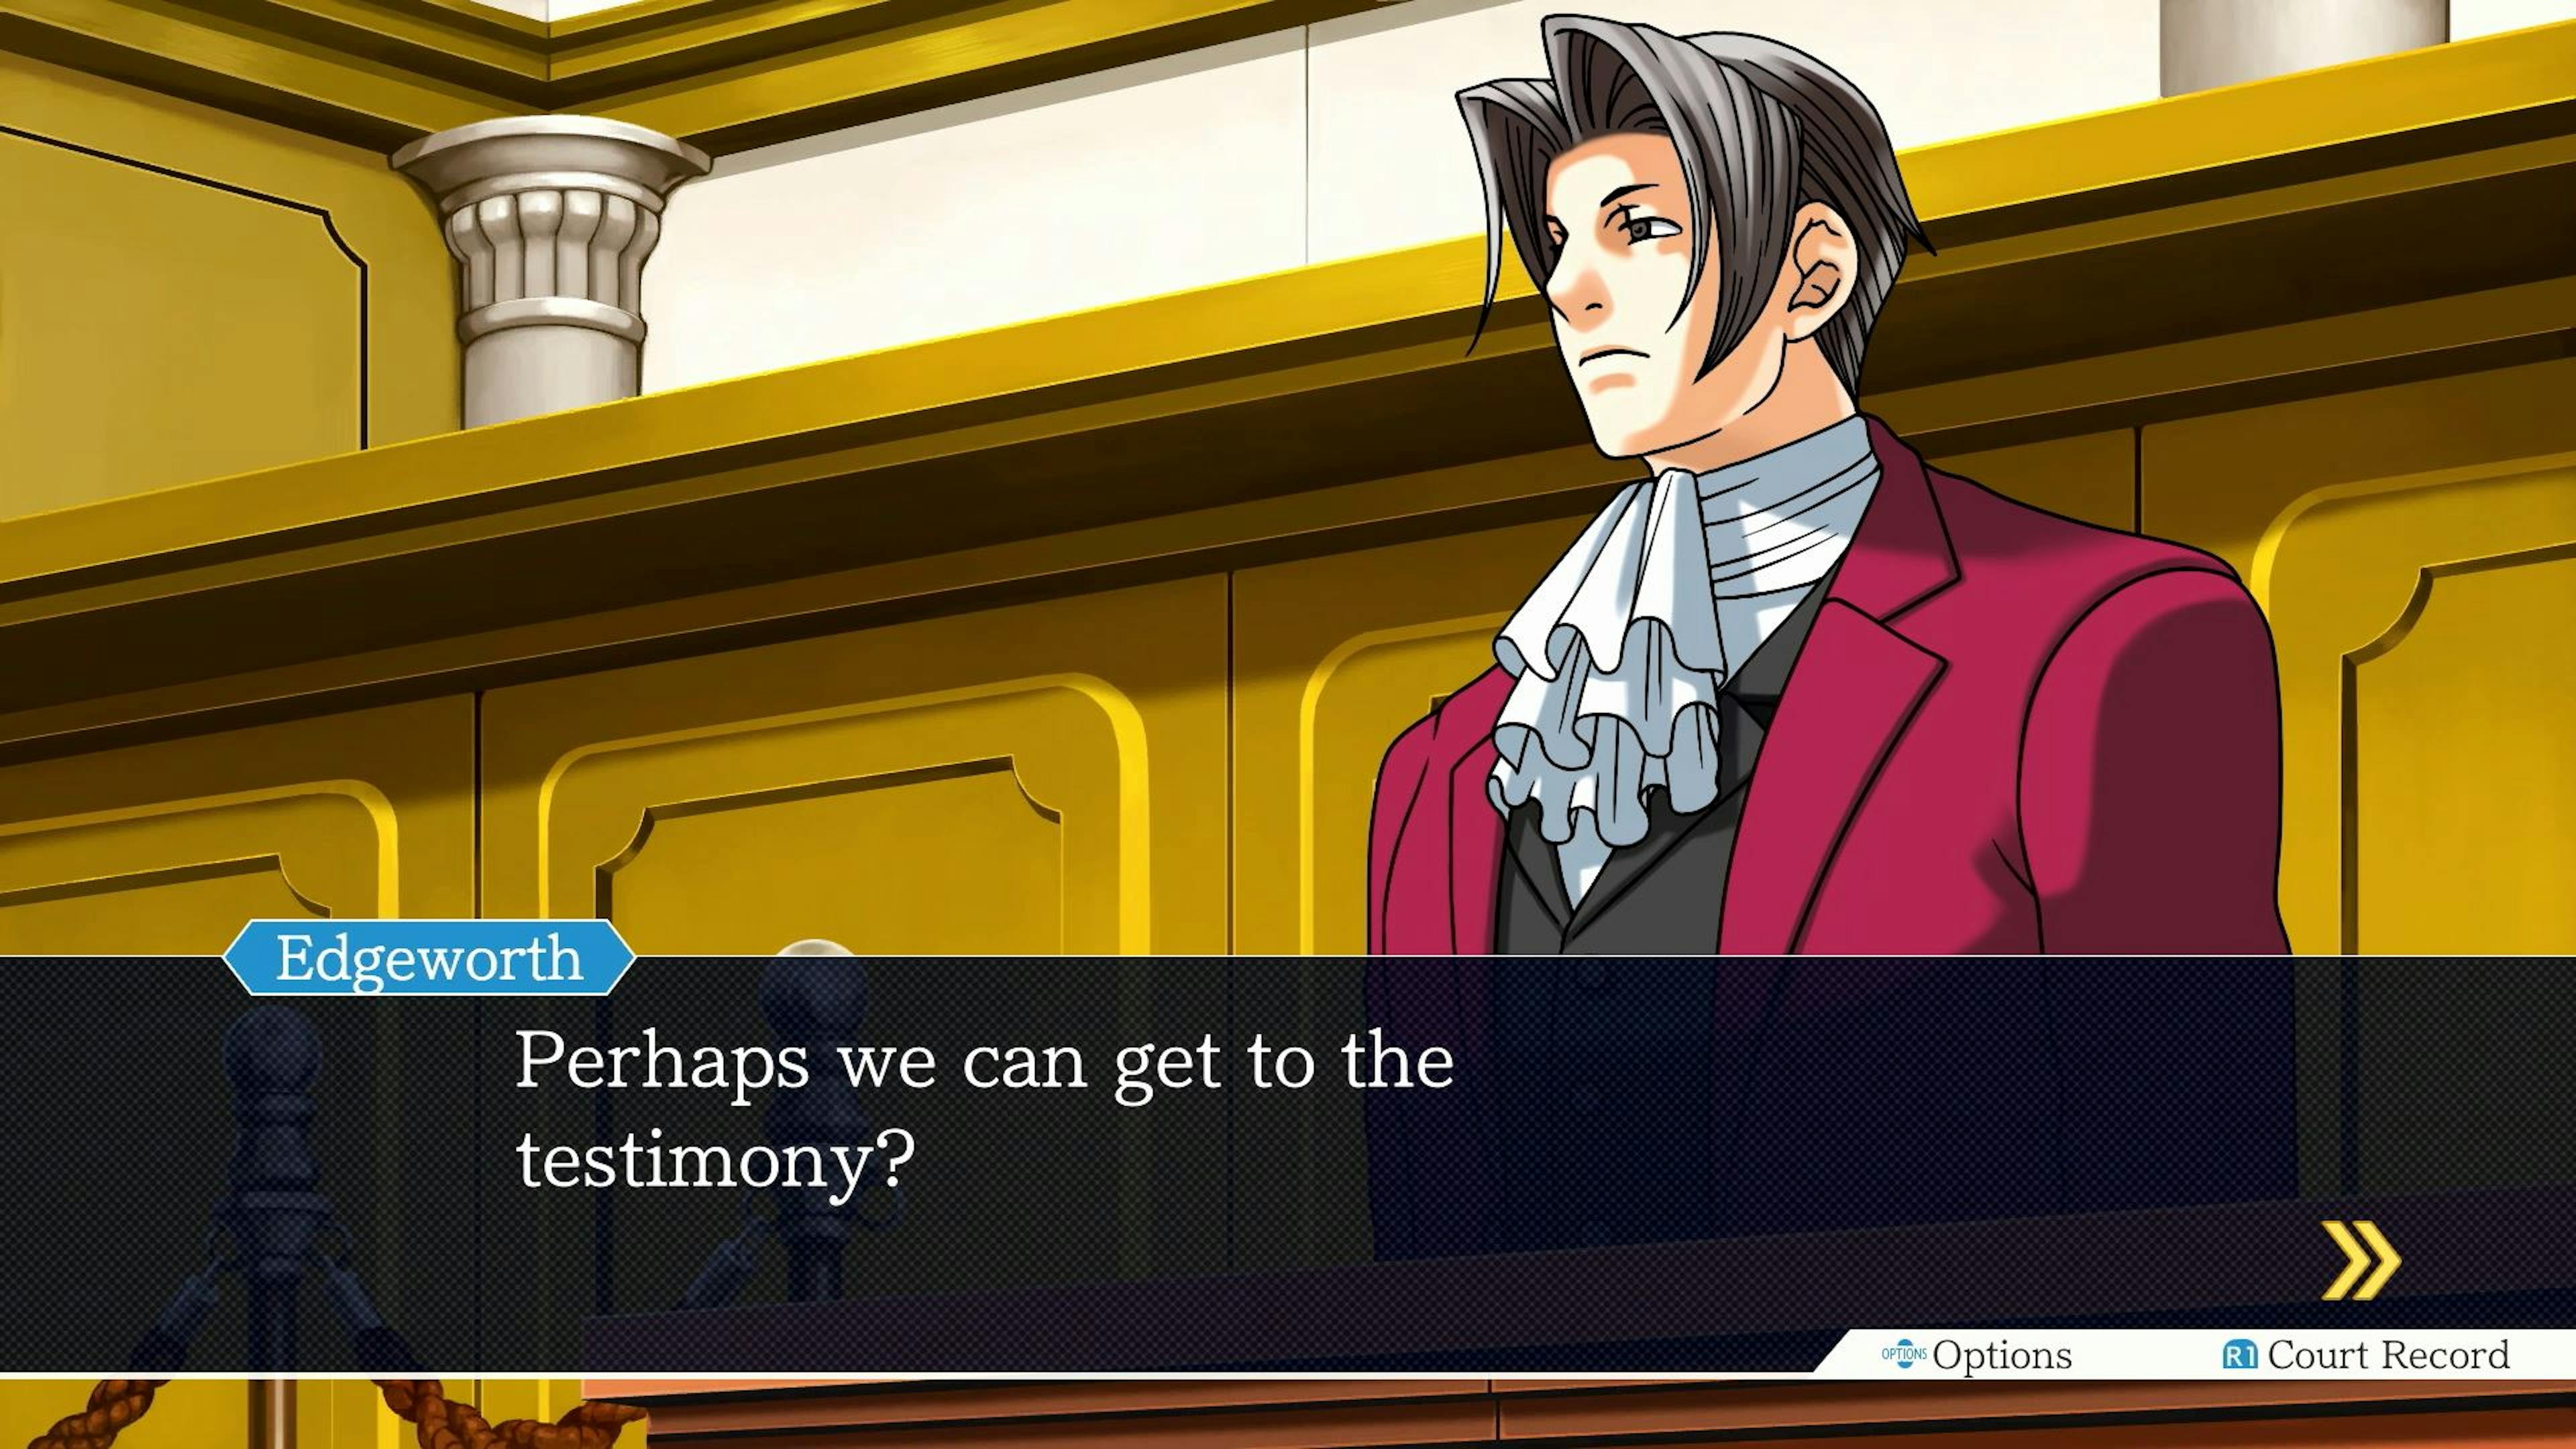 https://news.capcomusa.com/lets/browse/ace-attorney-files-miles-edgeworth-perfect-prosecuto